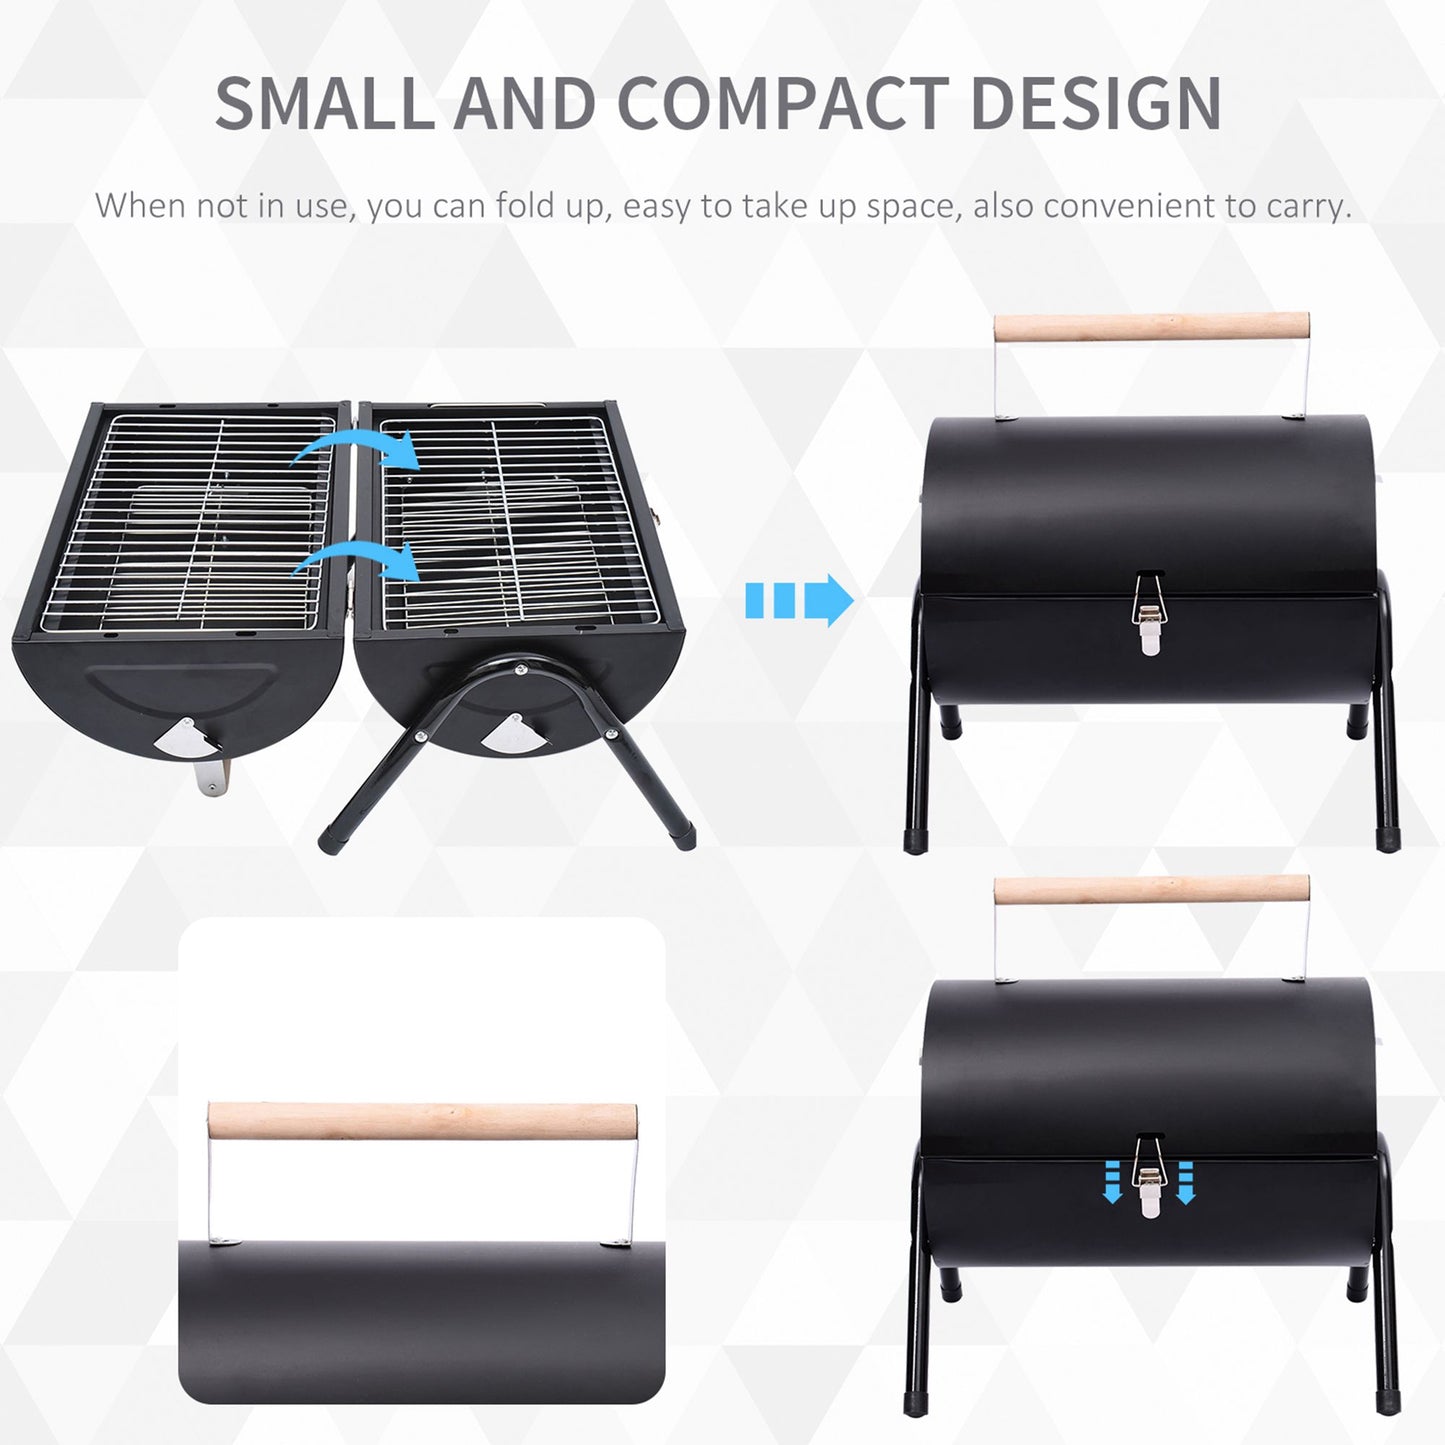 Outsunny Portable Charcoal BBQ Grill